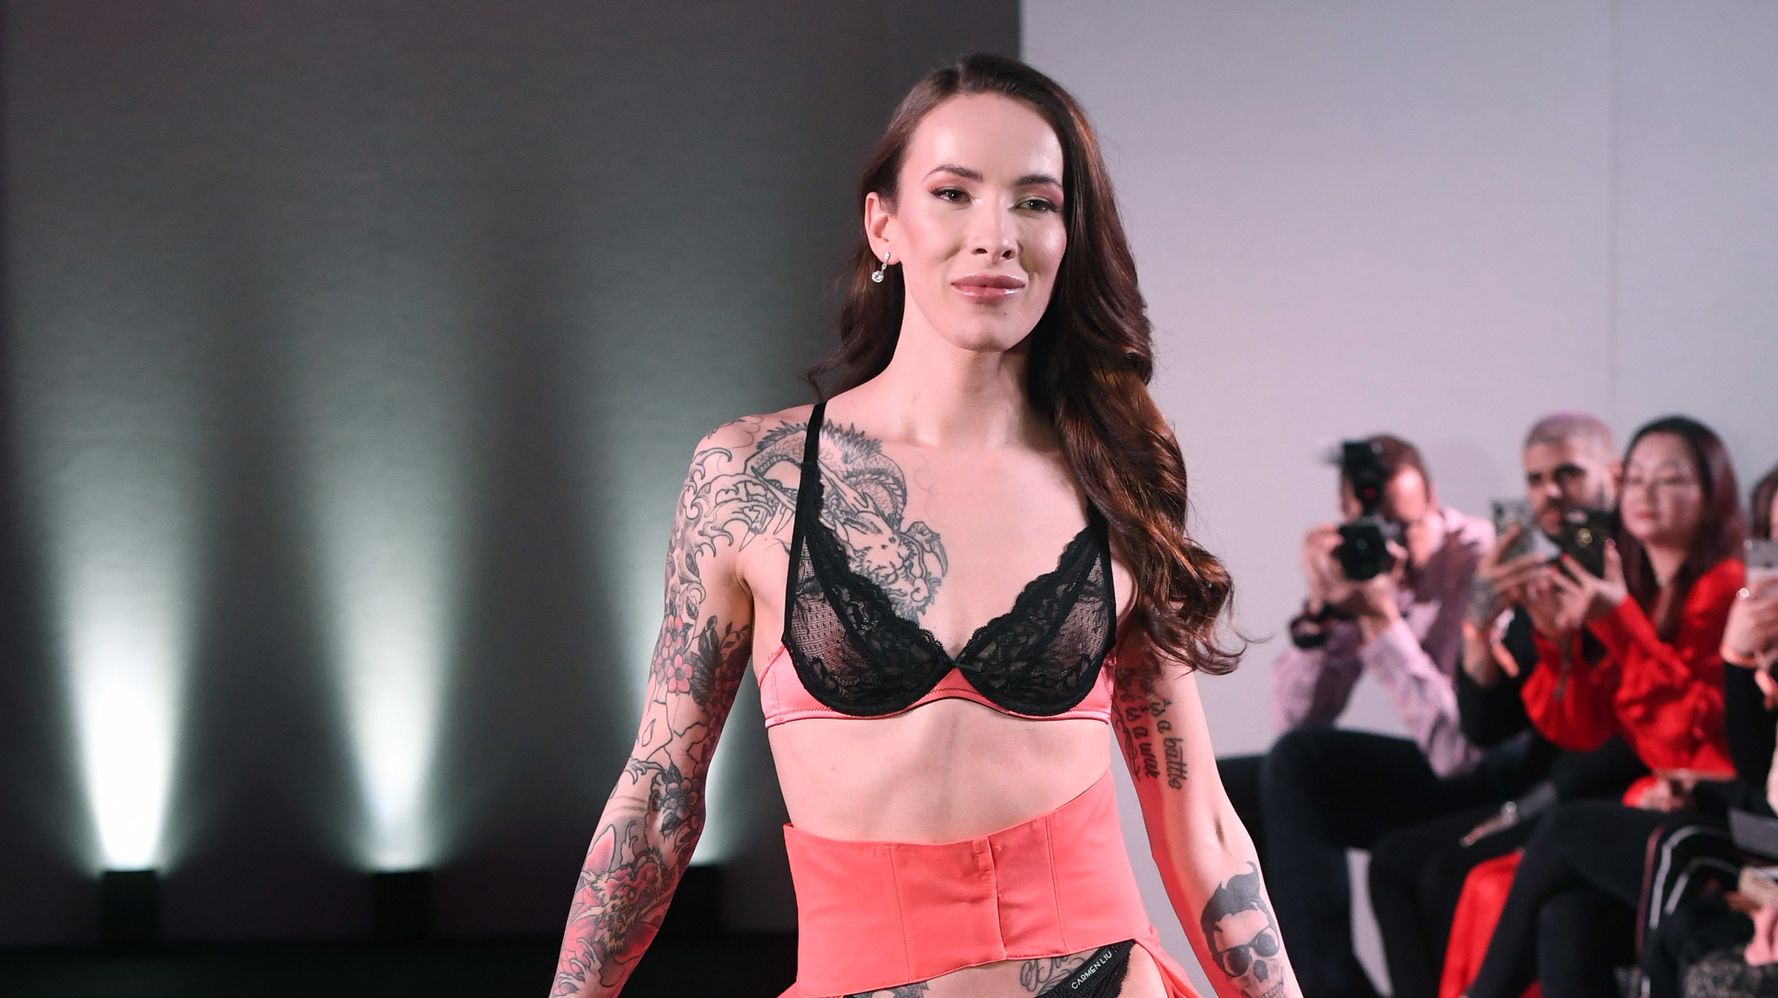 Britain's First Transgender Lingerie Brand Is Here To Make All Women Feel  Sexy